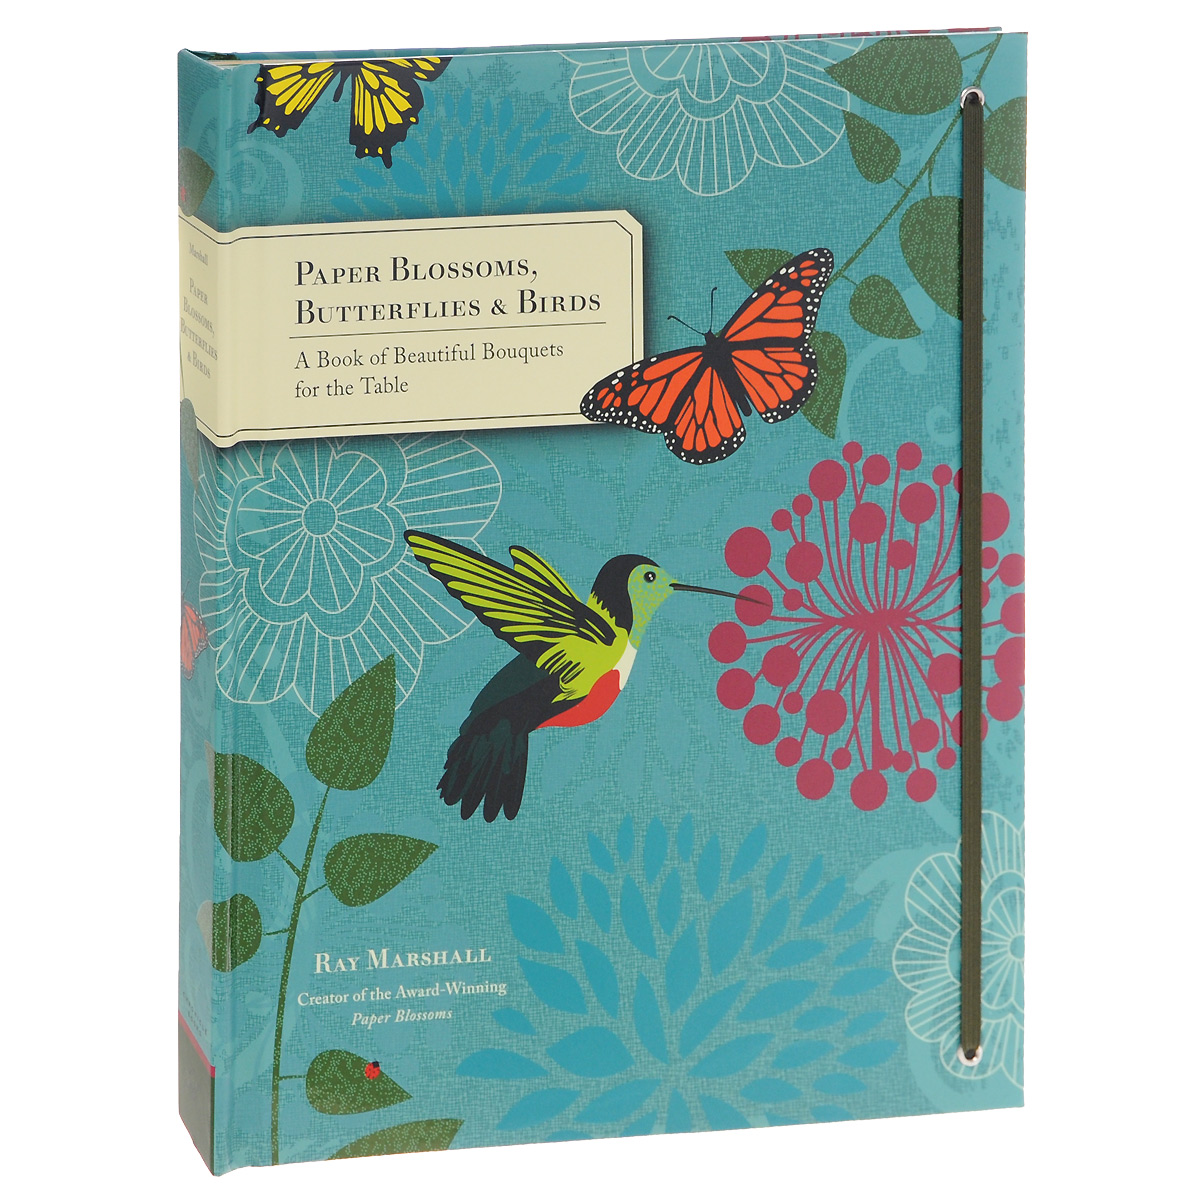 Paper Blossoms, Butterflies&Birds: A Book of Beautiful Bouquets for the Table